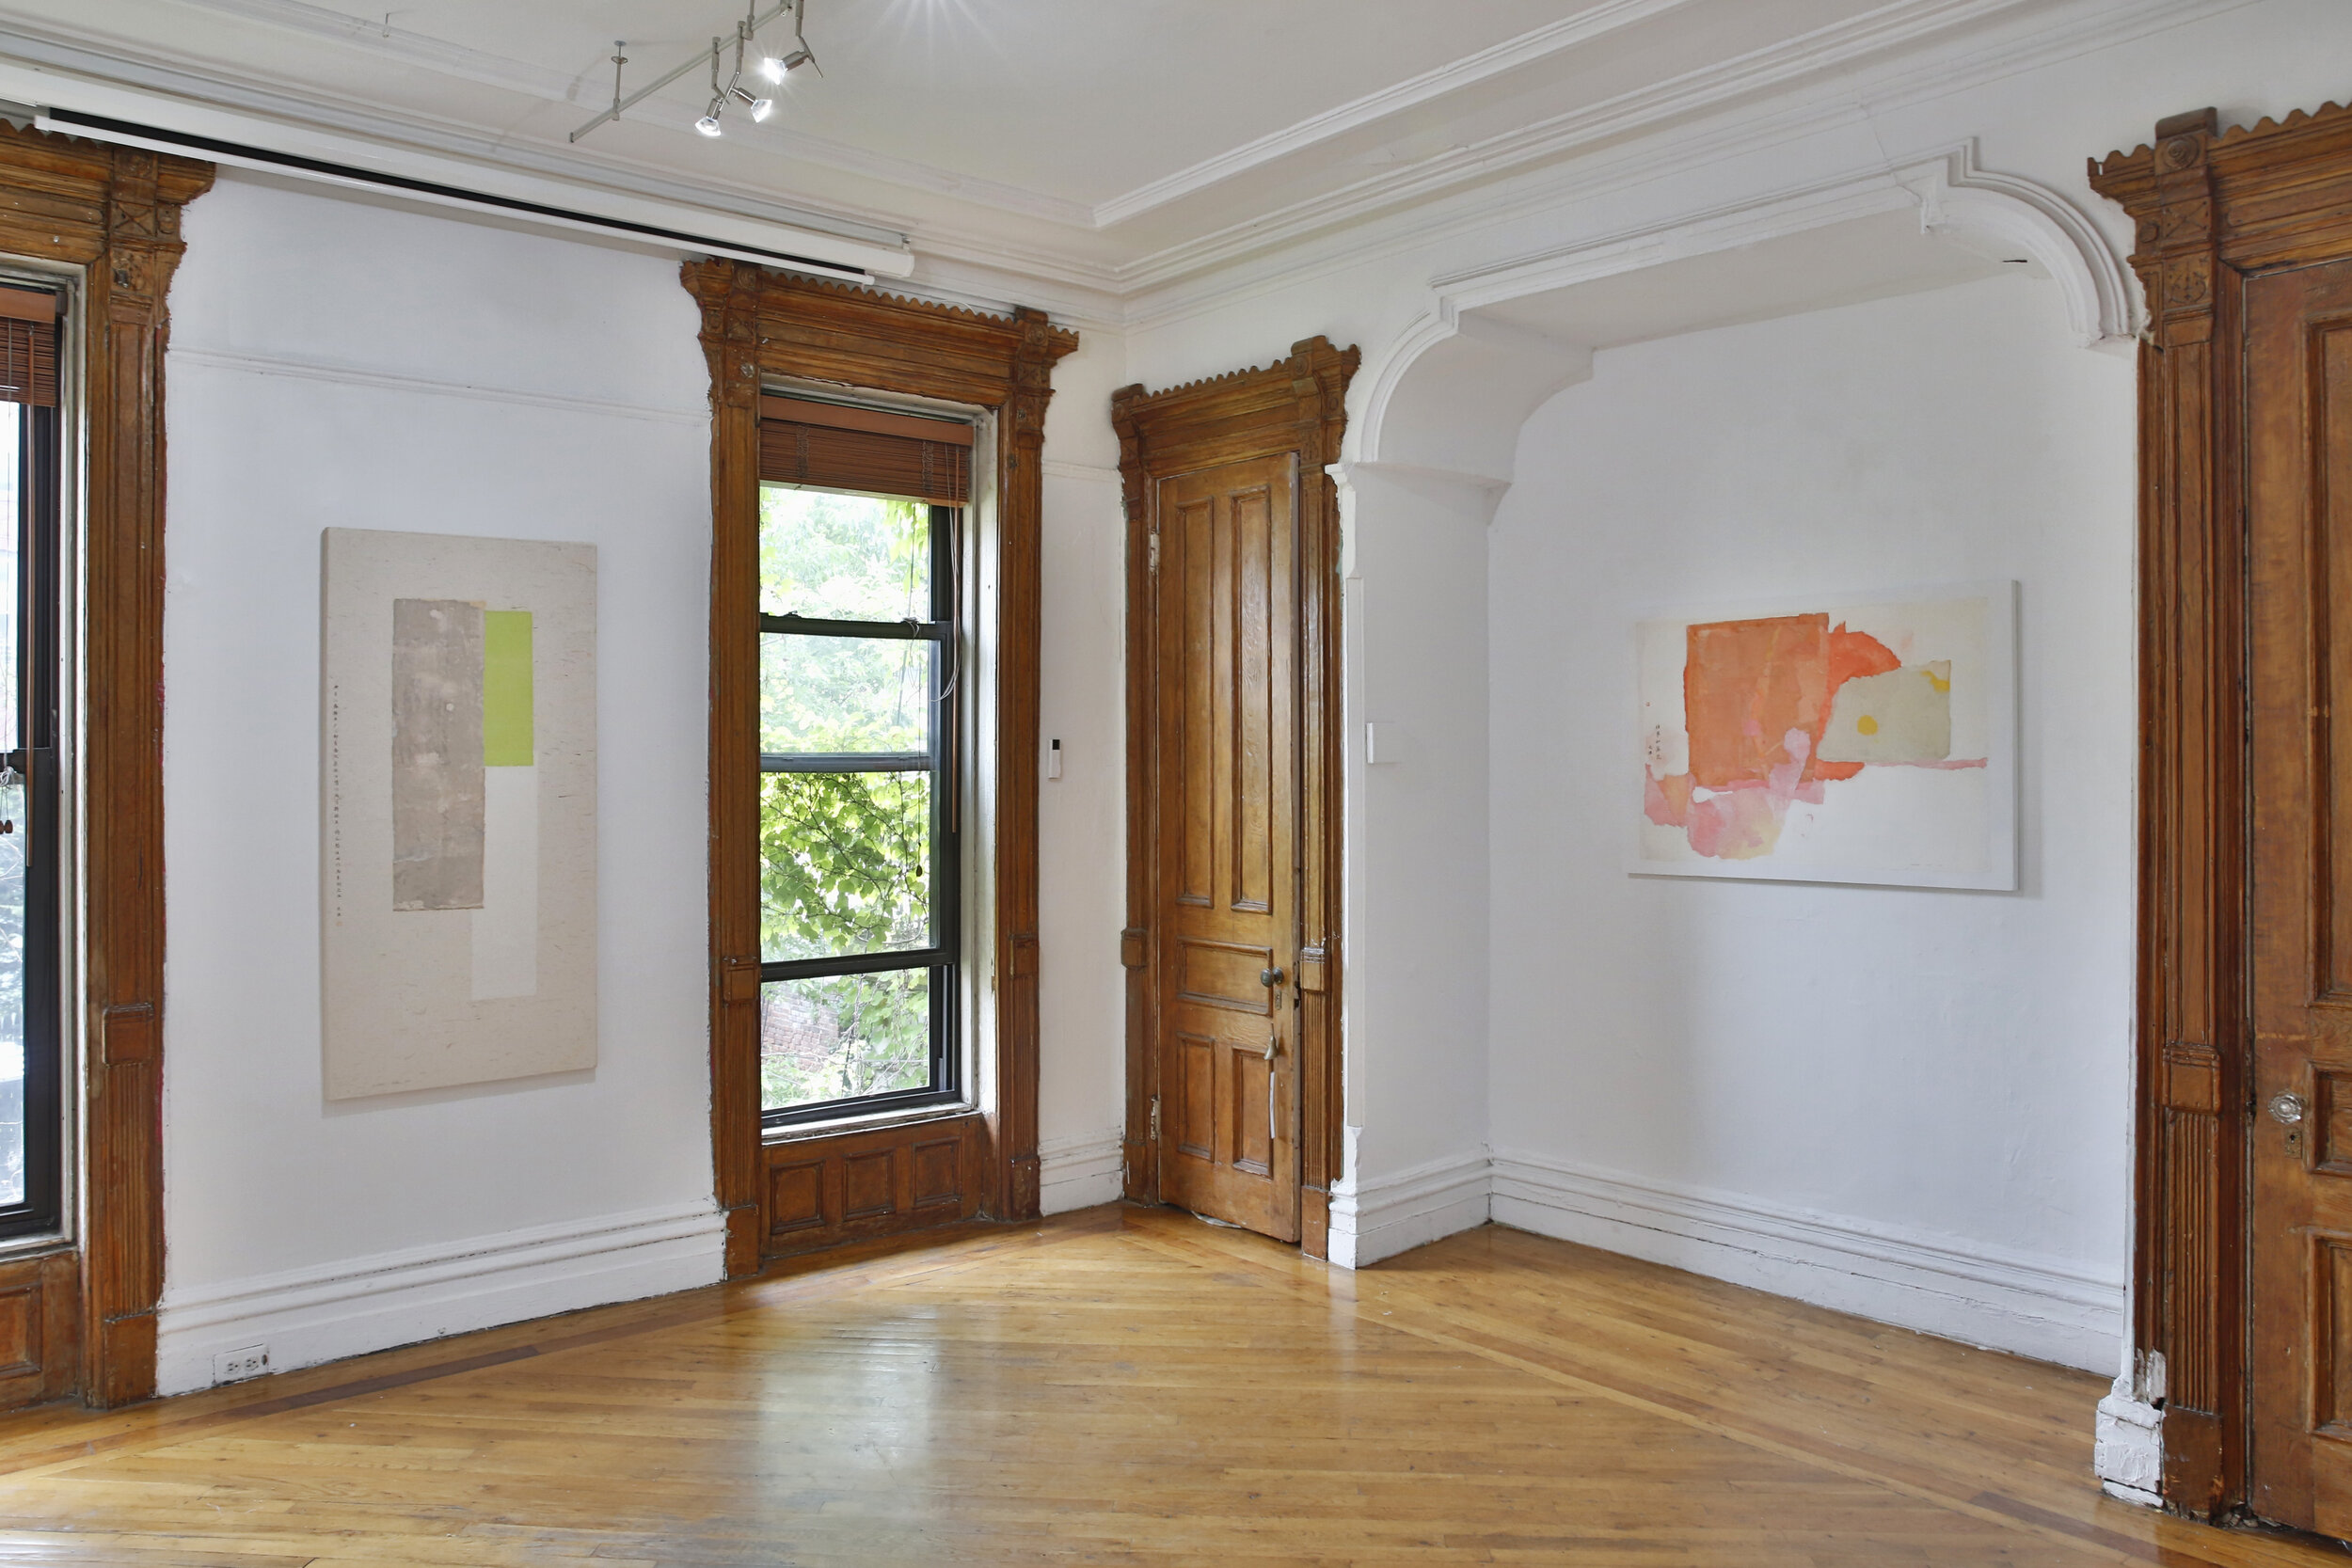  Installation view of  Wei Jia: Good Times . Photo by Lynn Hai ©Wei Jia, courtesy of Fou Gallery 